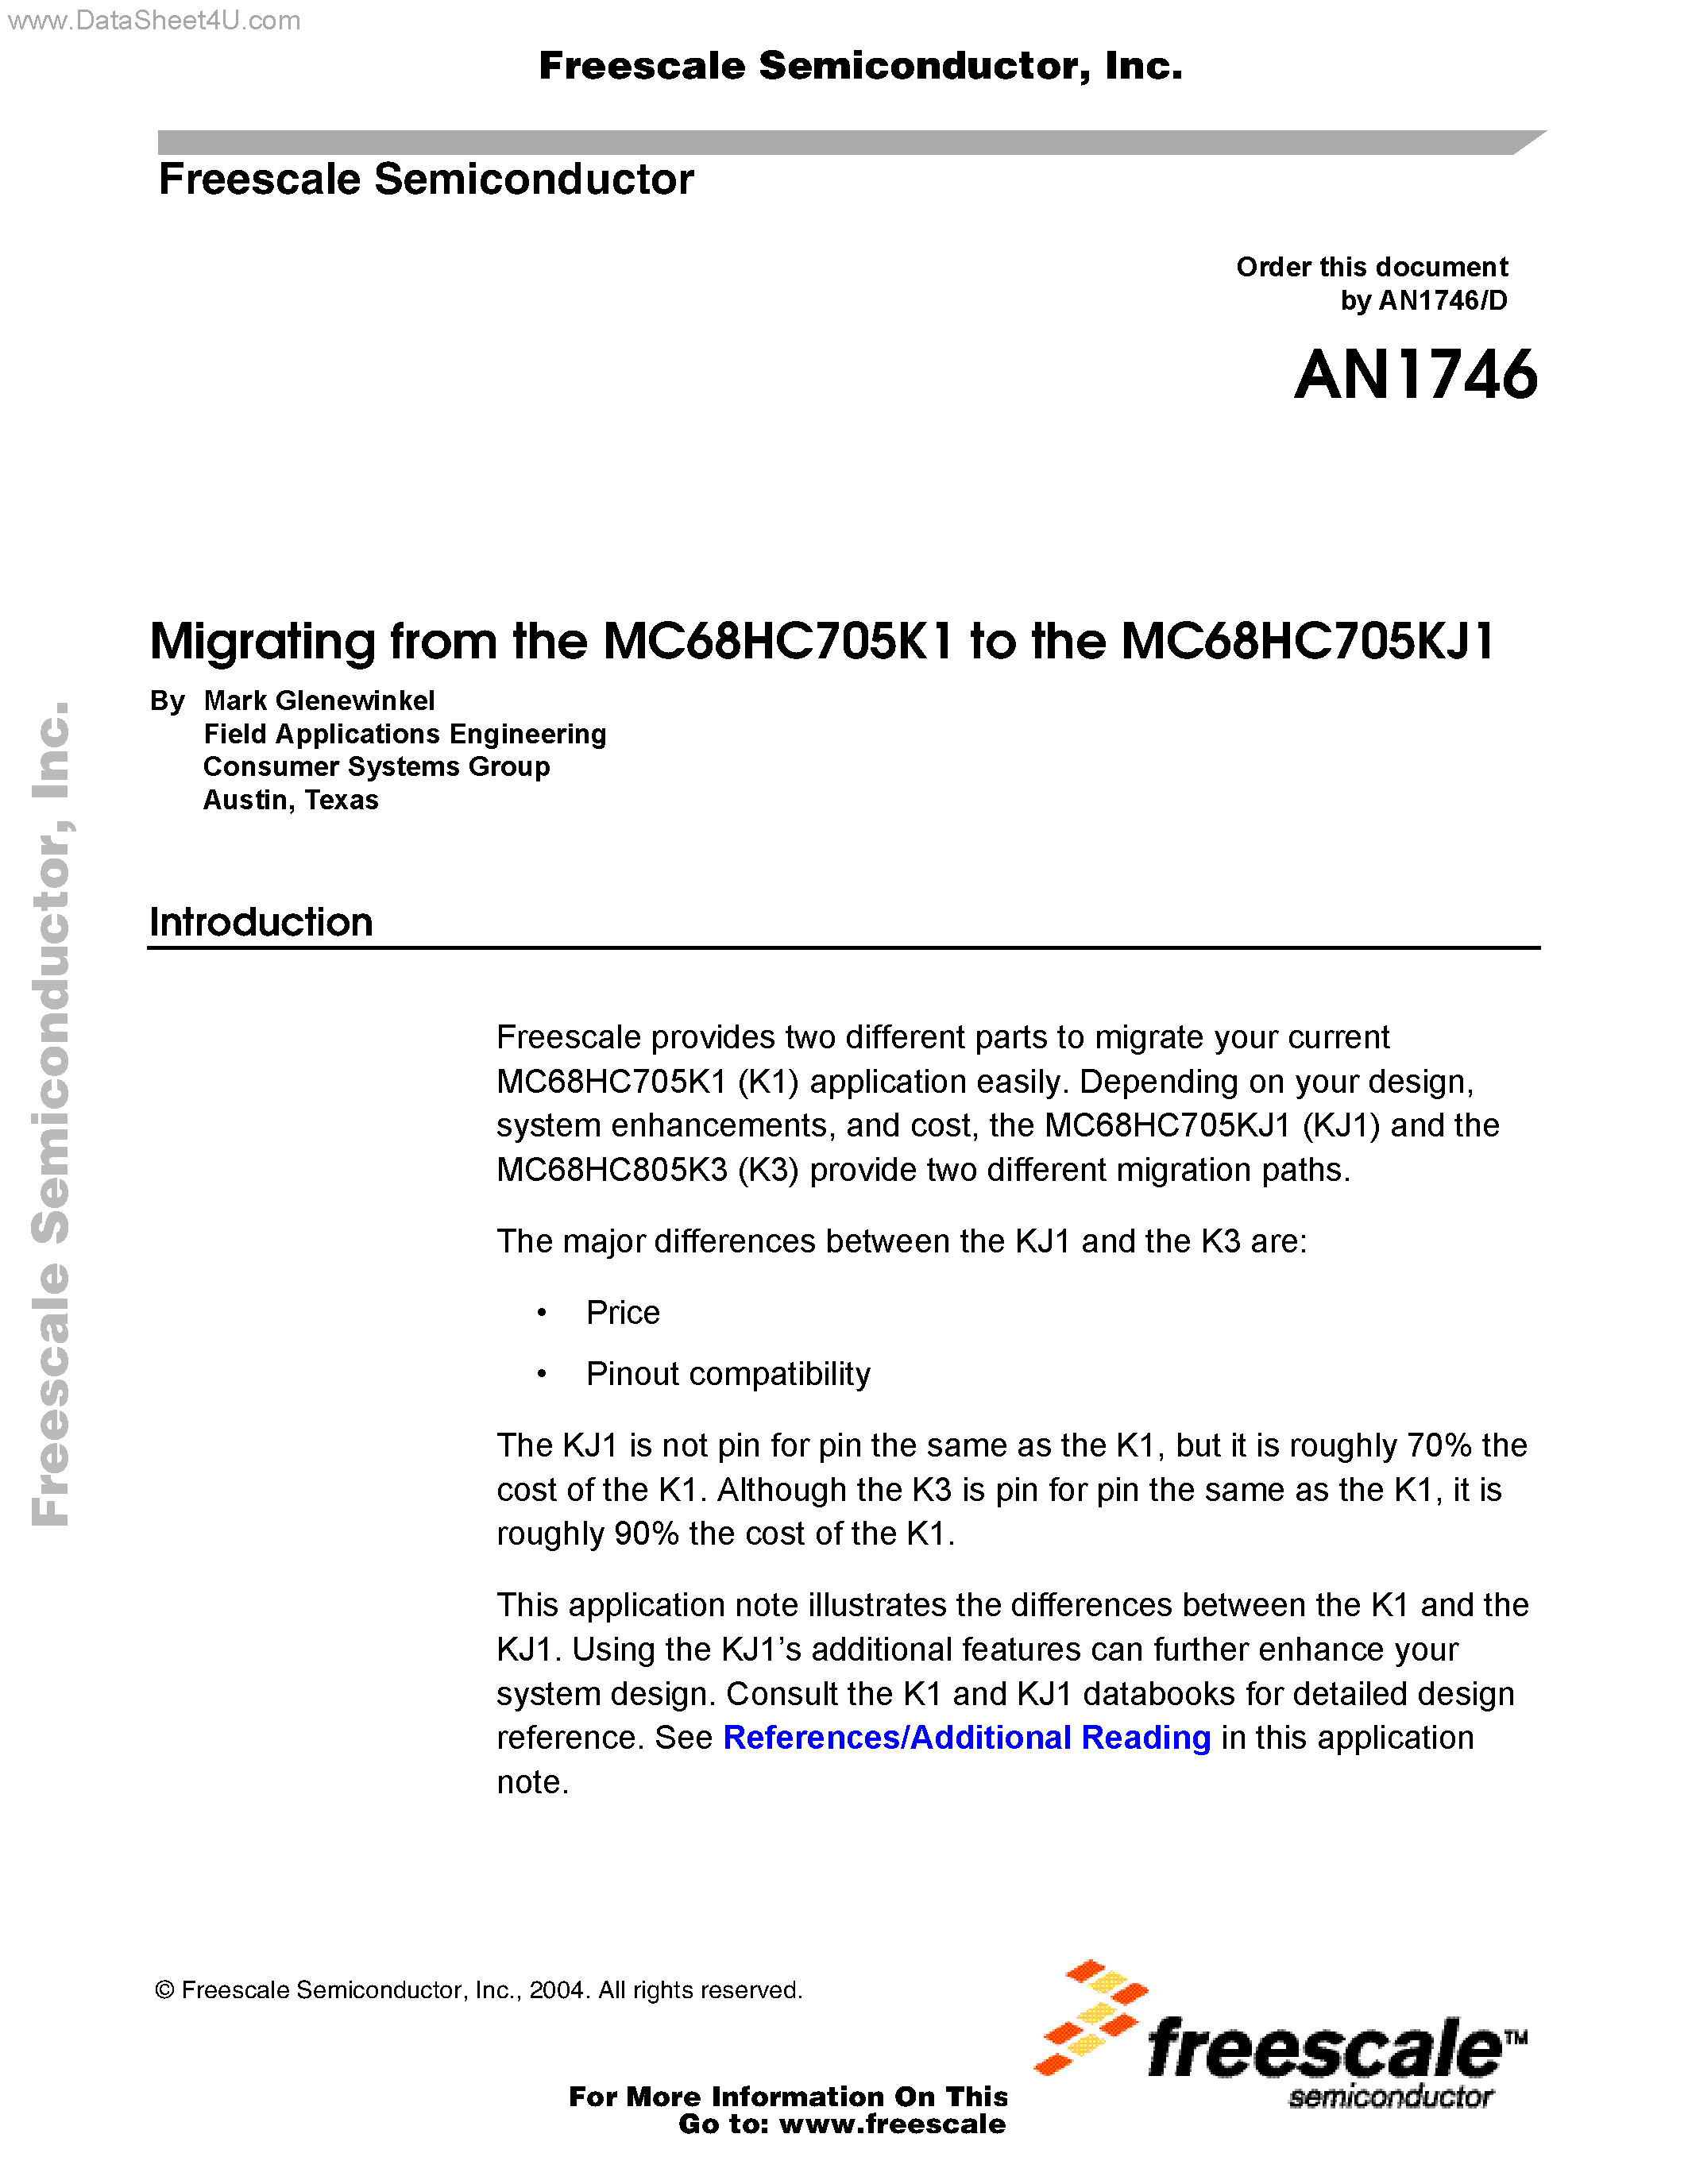 Даташит AN1746 - Migrating from the MC68HC705K1 to the MC68HC705KJ1 страница 1